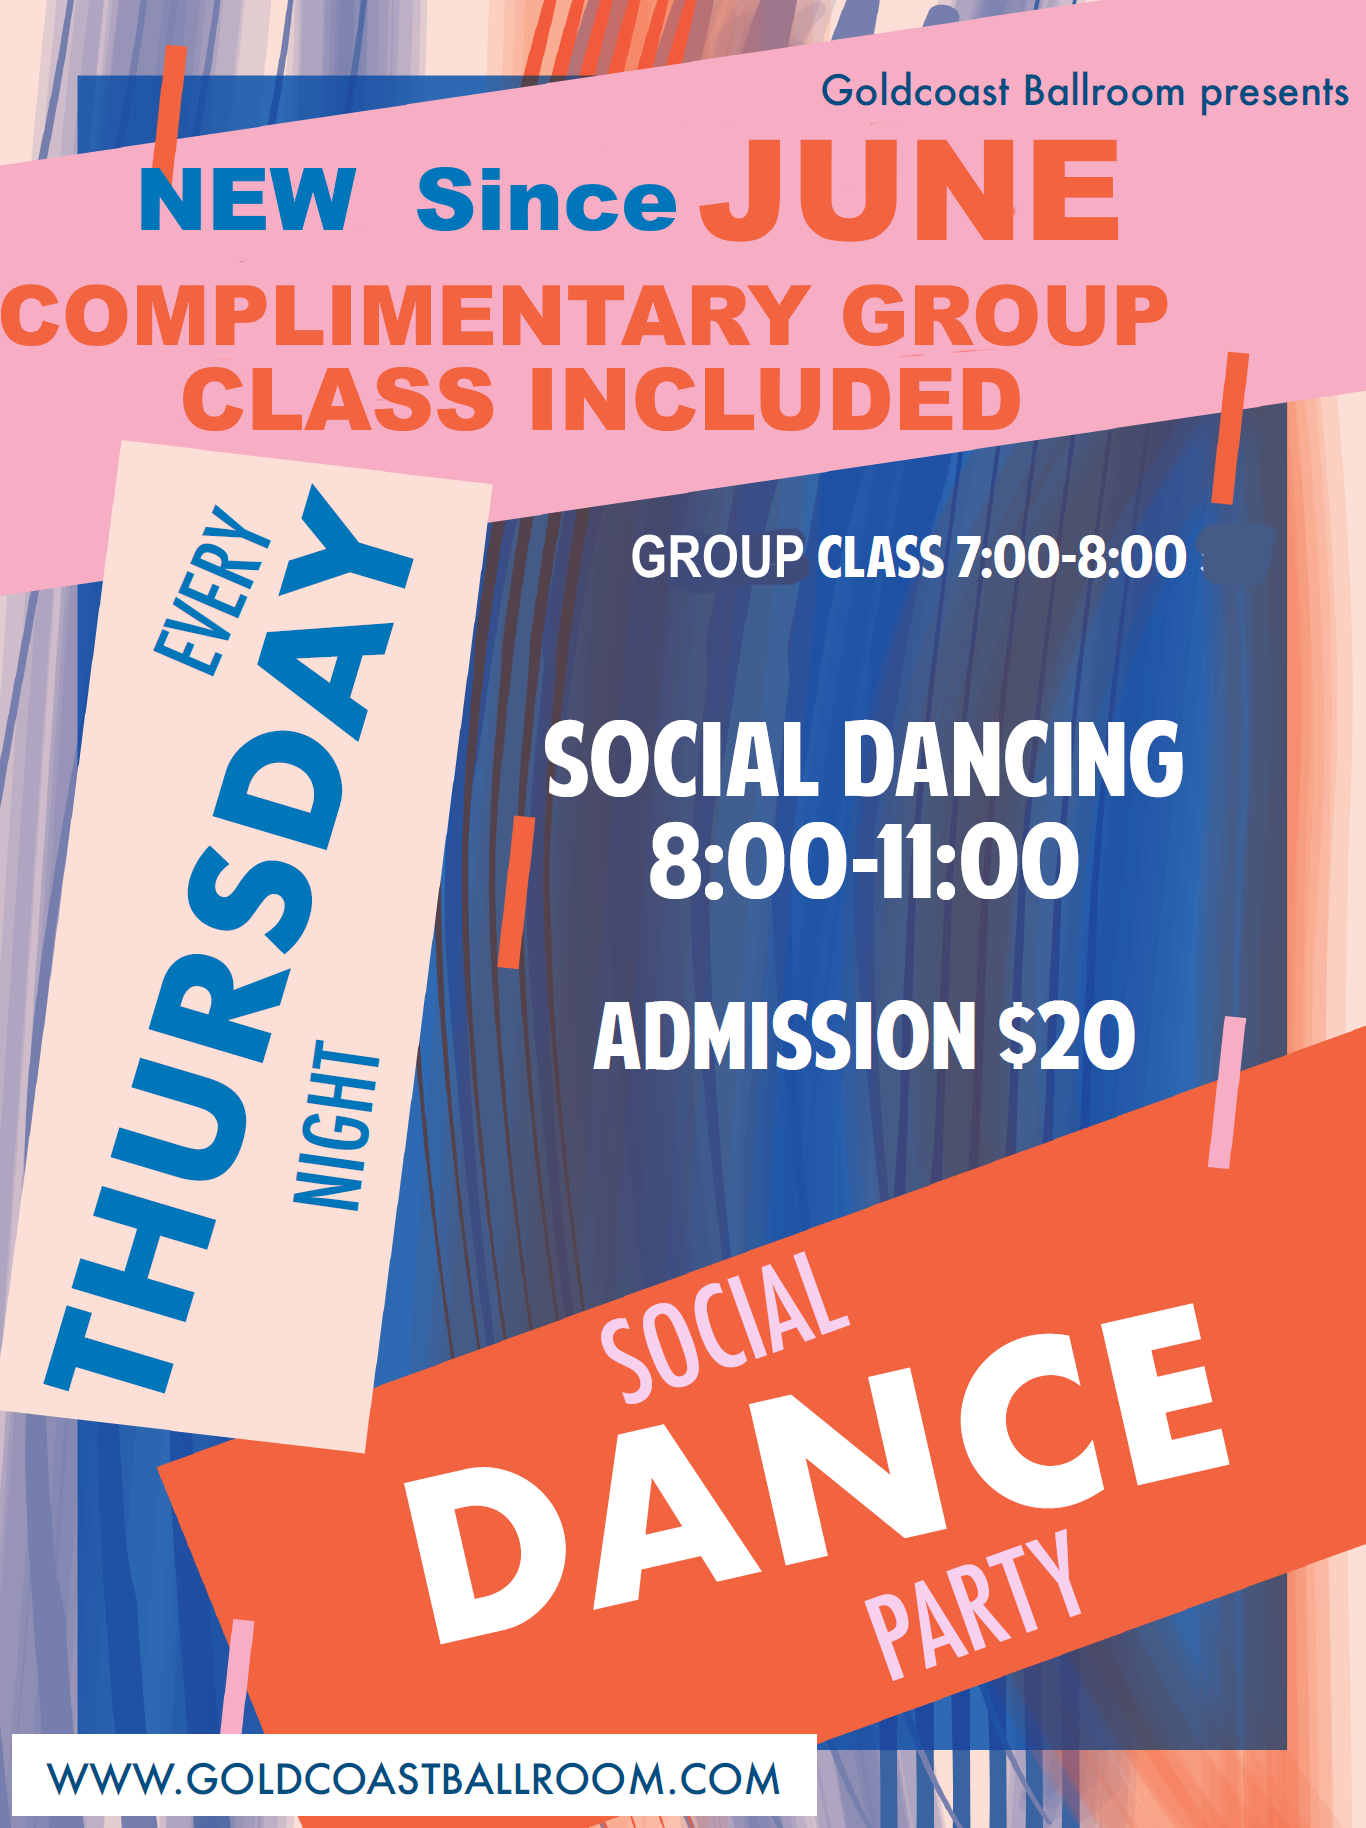 Thursday Nights - New Since June - Social Dancing with Complimentary Group Class Included